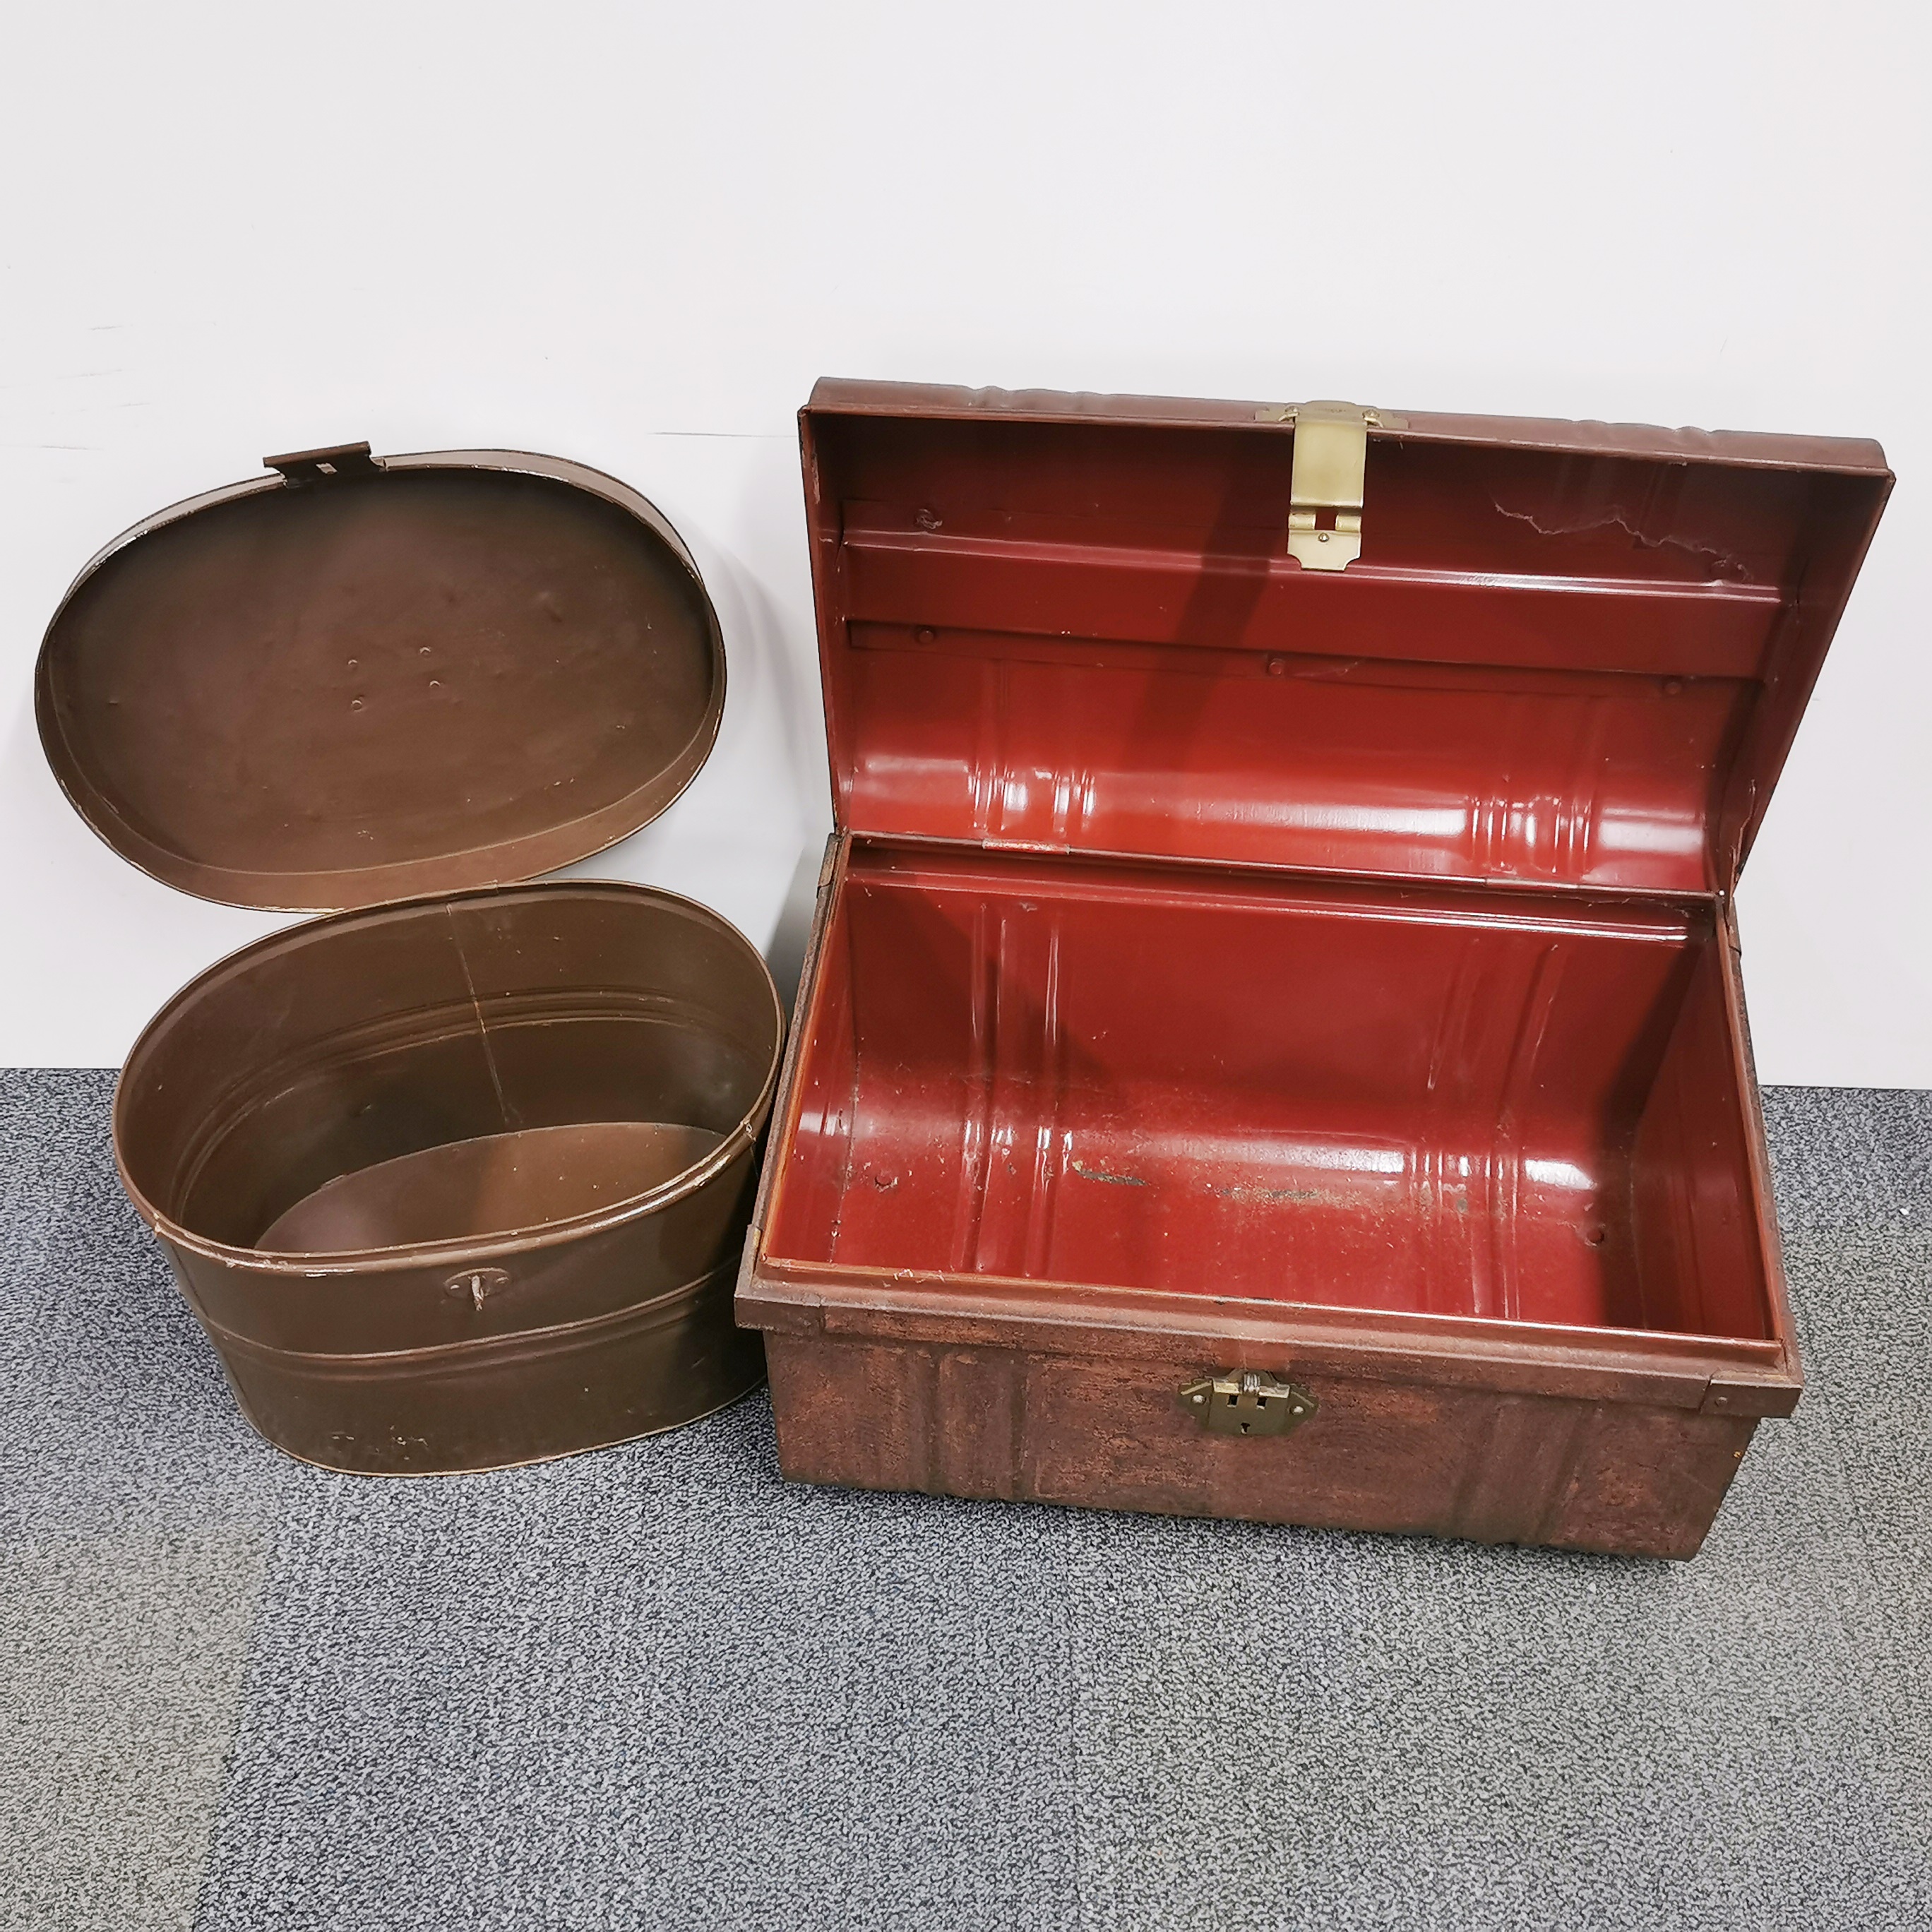 A painted metal hat box and a metal trunk, trunk size 55 x 36 x 33cm. - Image 2 of 3